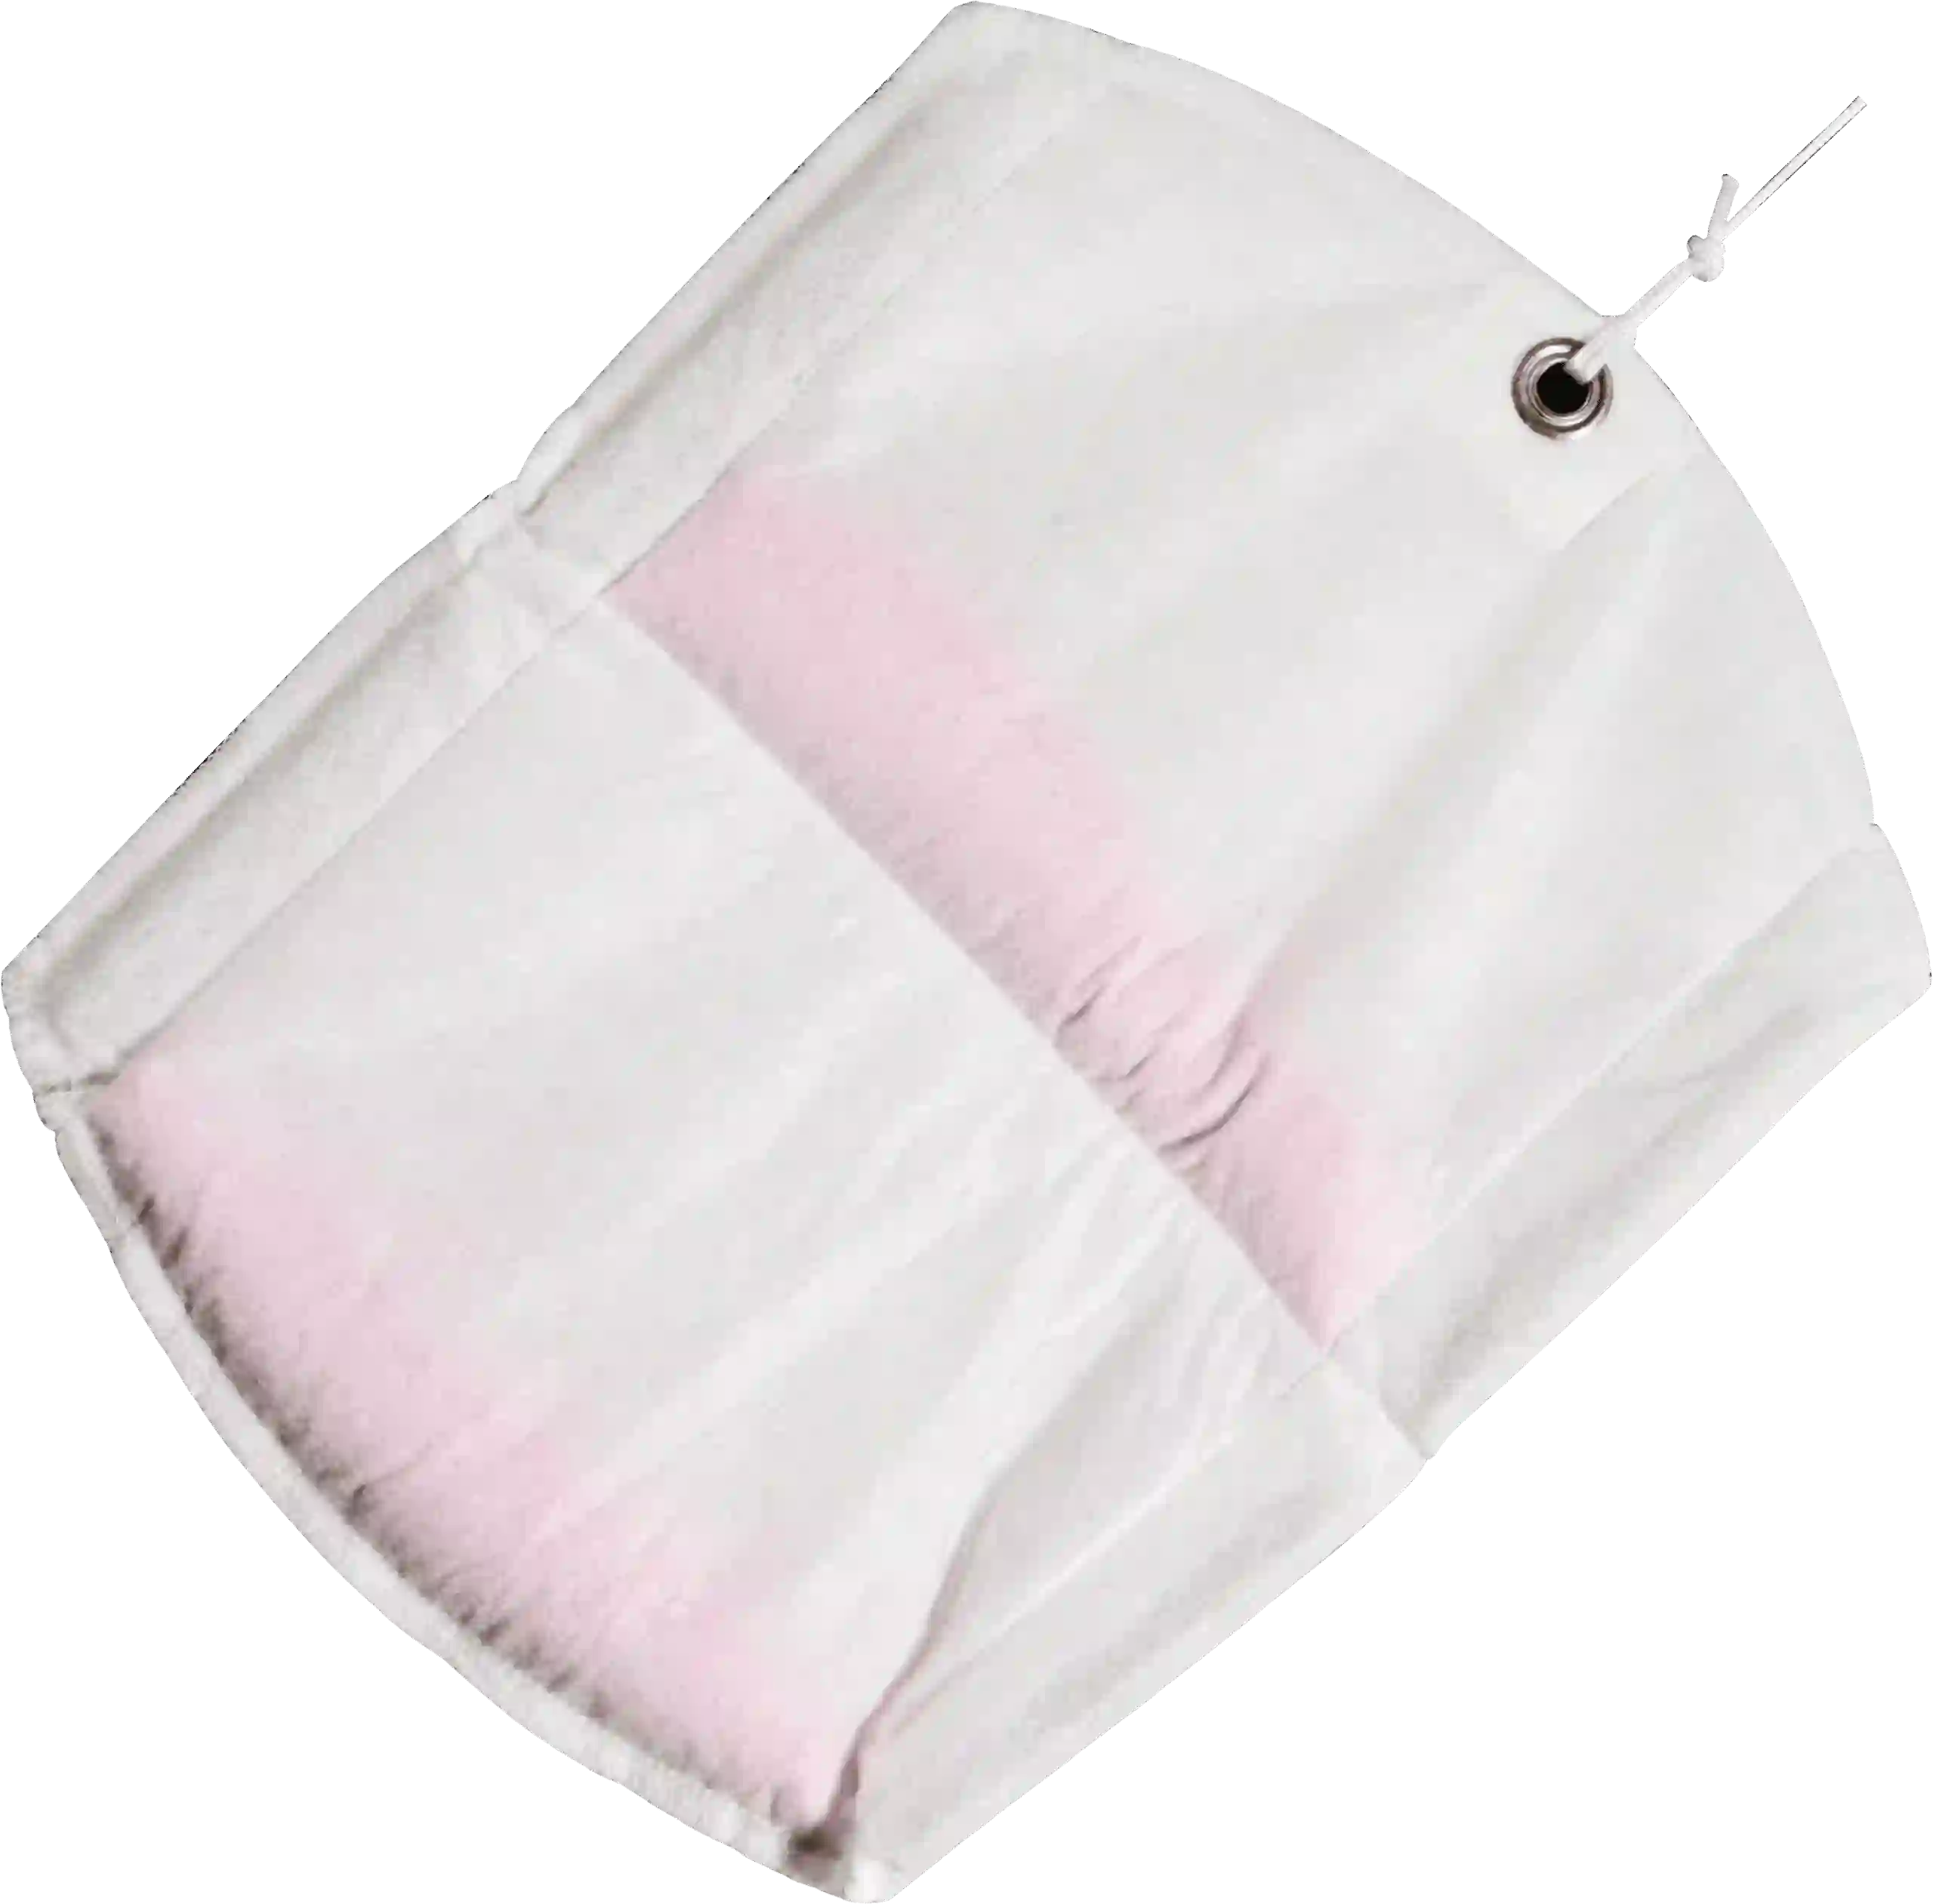 White canvas bag used for liquid absorption or filtration.